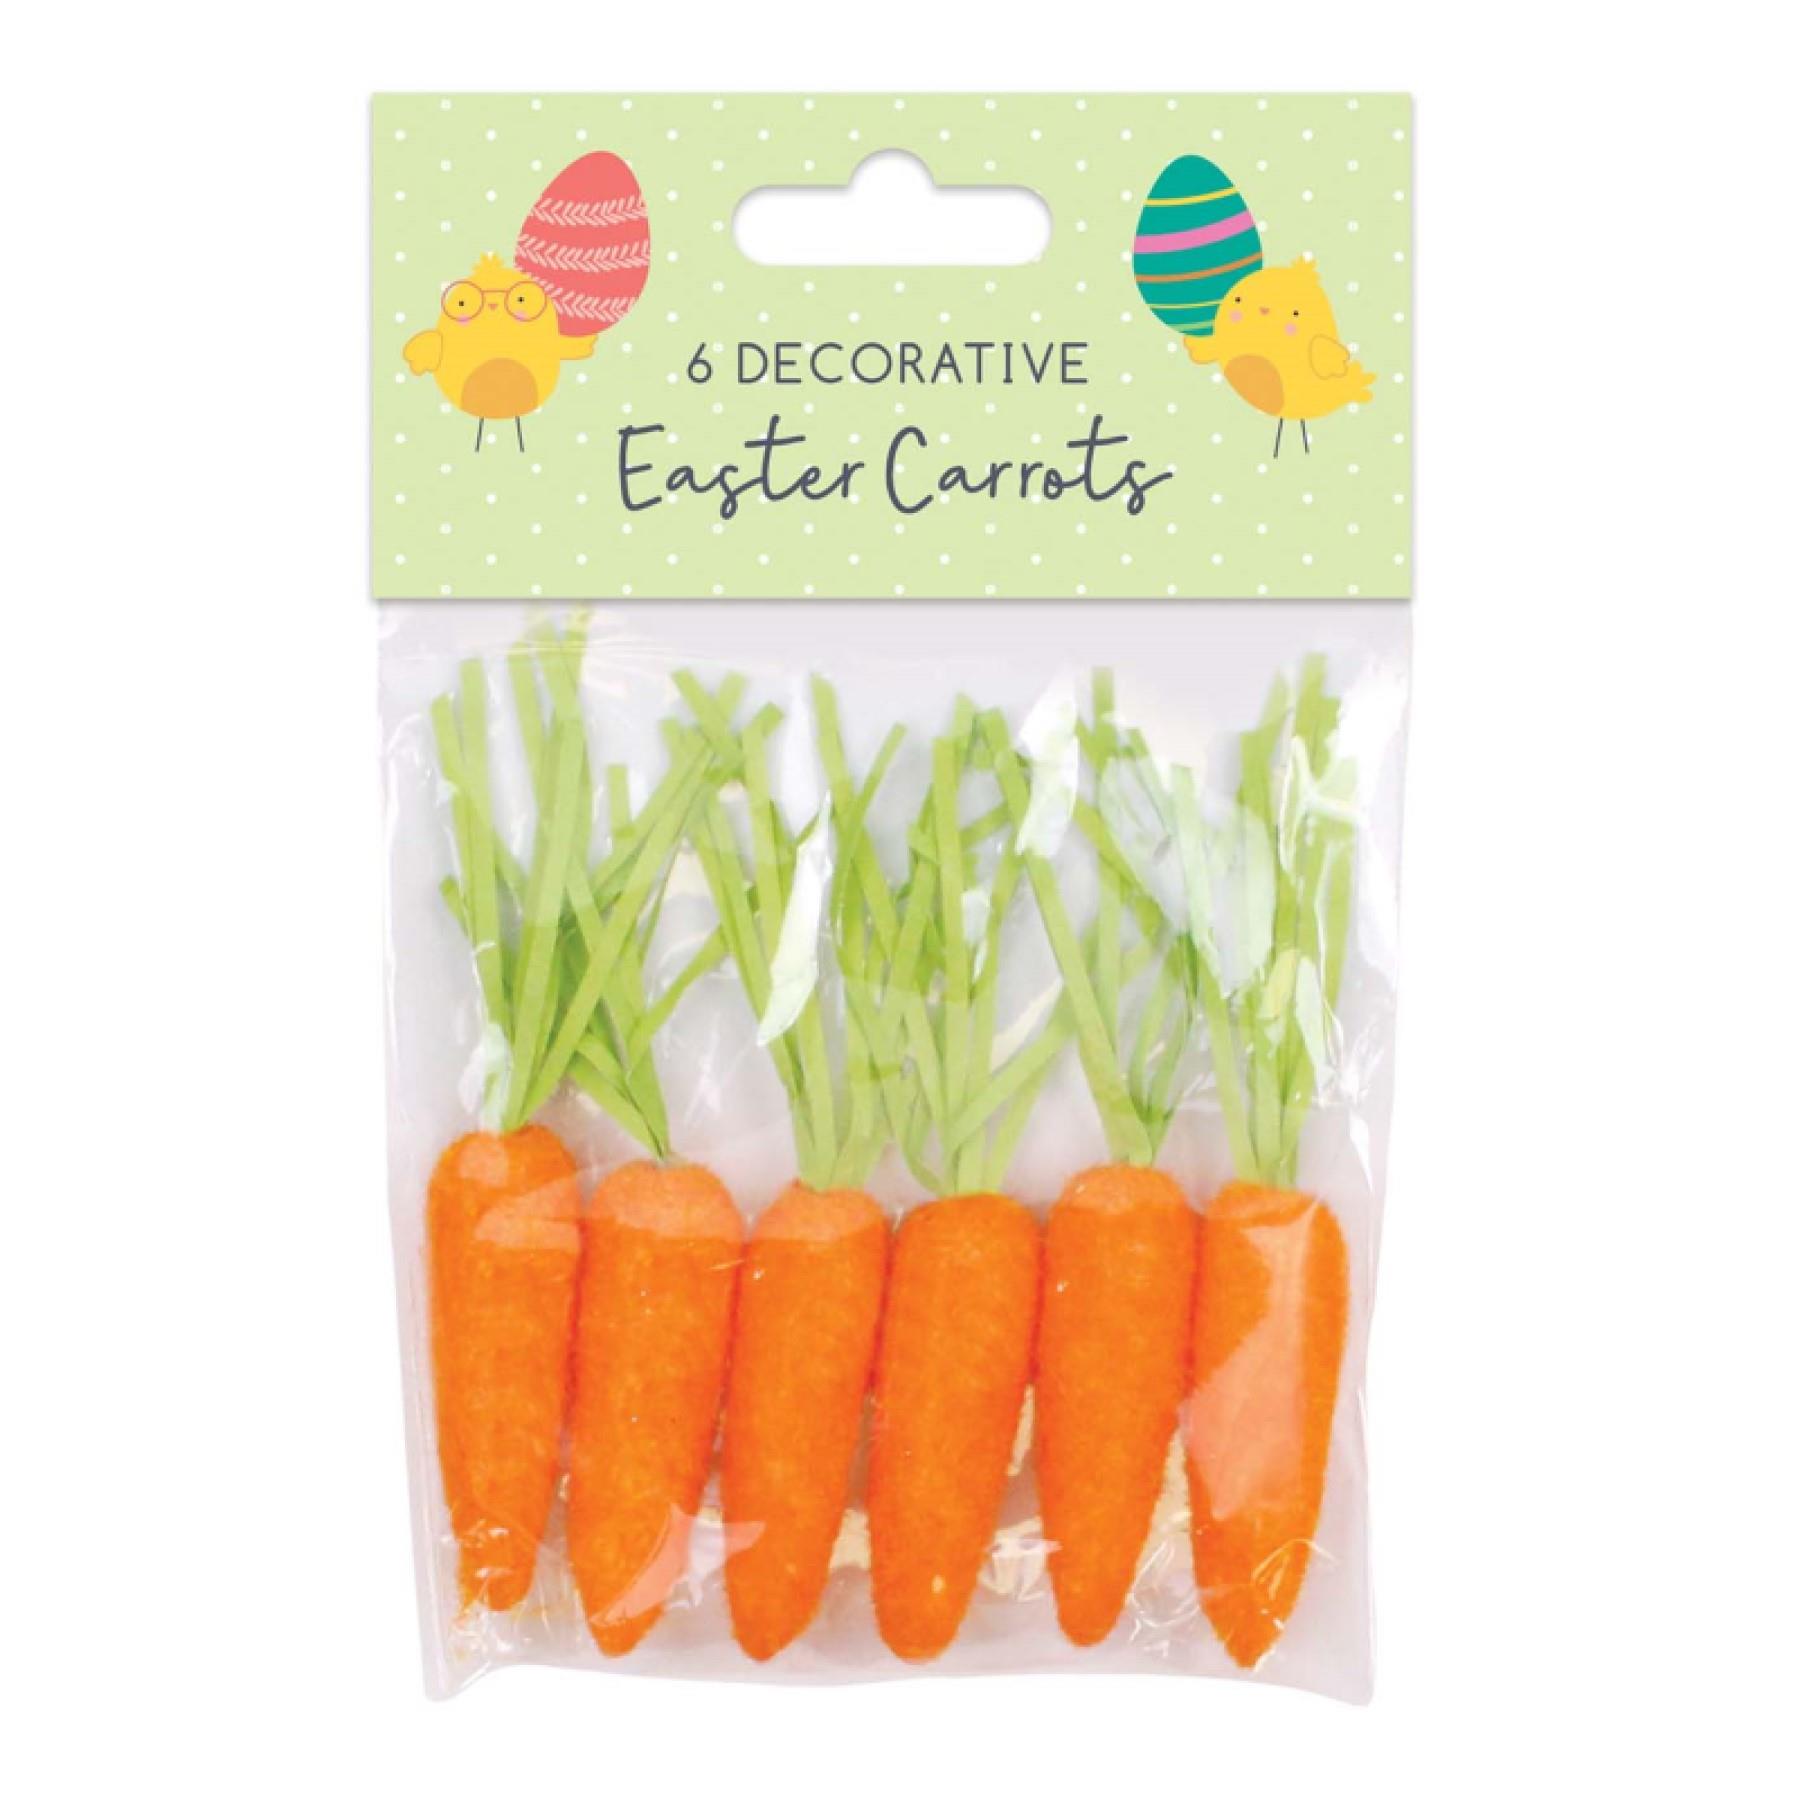 Easter Decorations, Bonnet Making, Arts and Crafts - 6 Pack Carrots